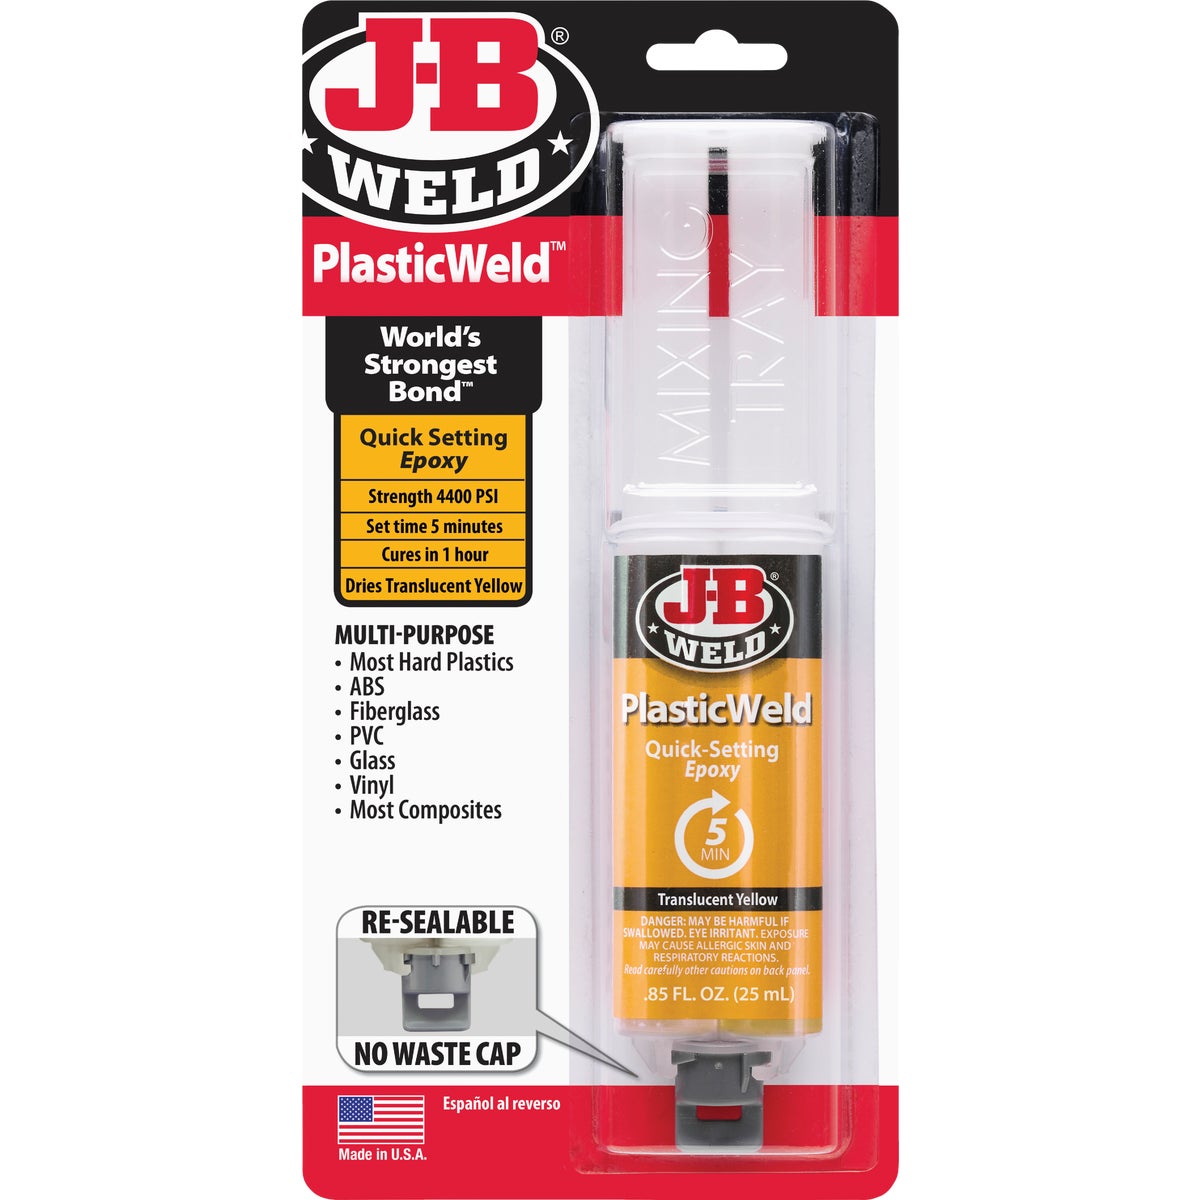 Item 301556, PlasticWeld is a specially formulated two-part adhesive and epoxy filler 